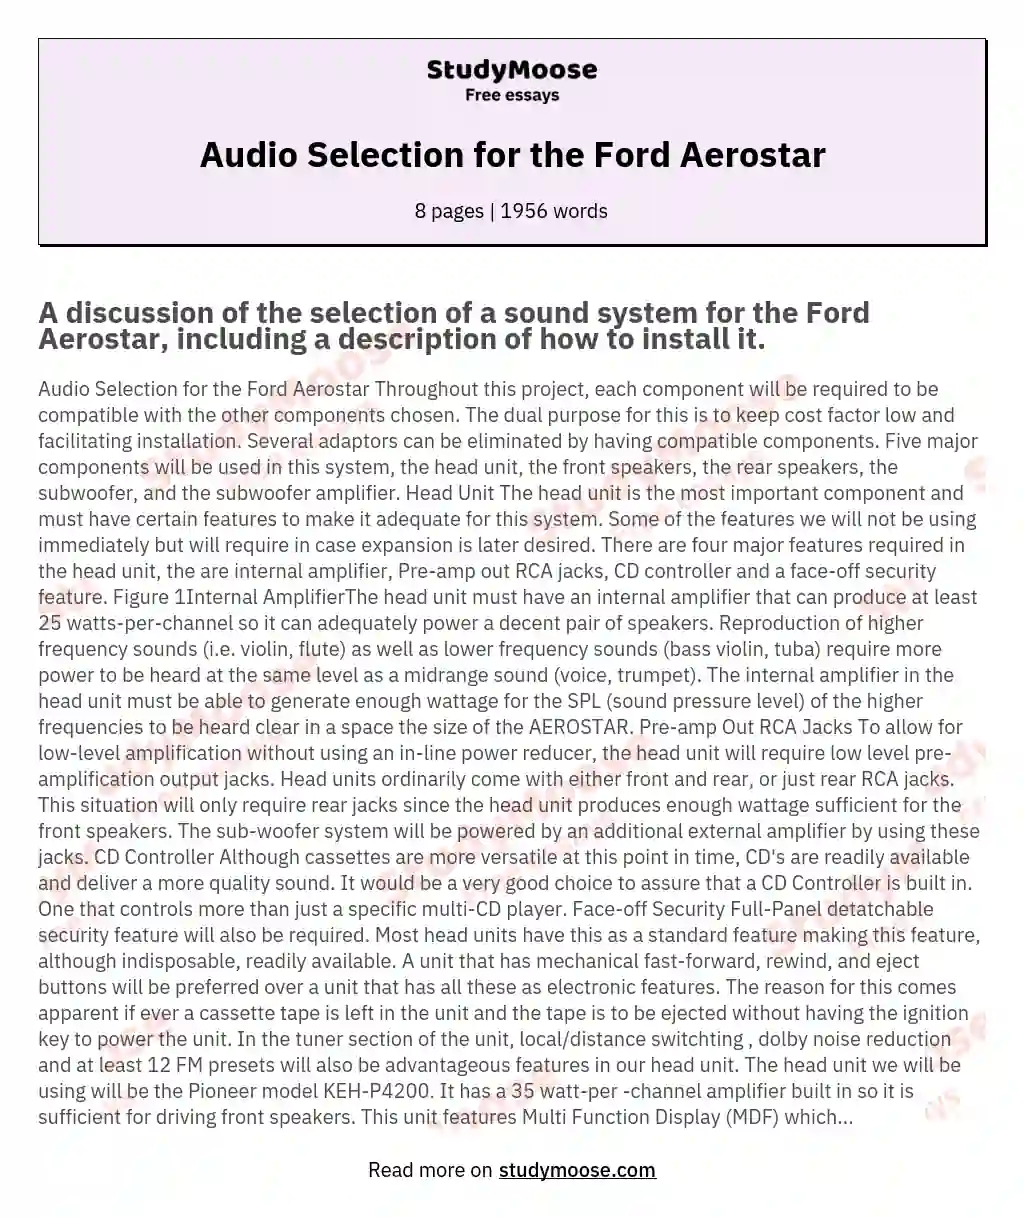 Audio Selection for the Ford Aerostar essay